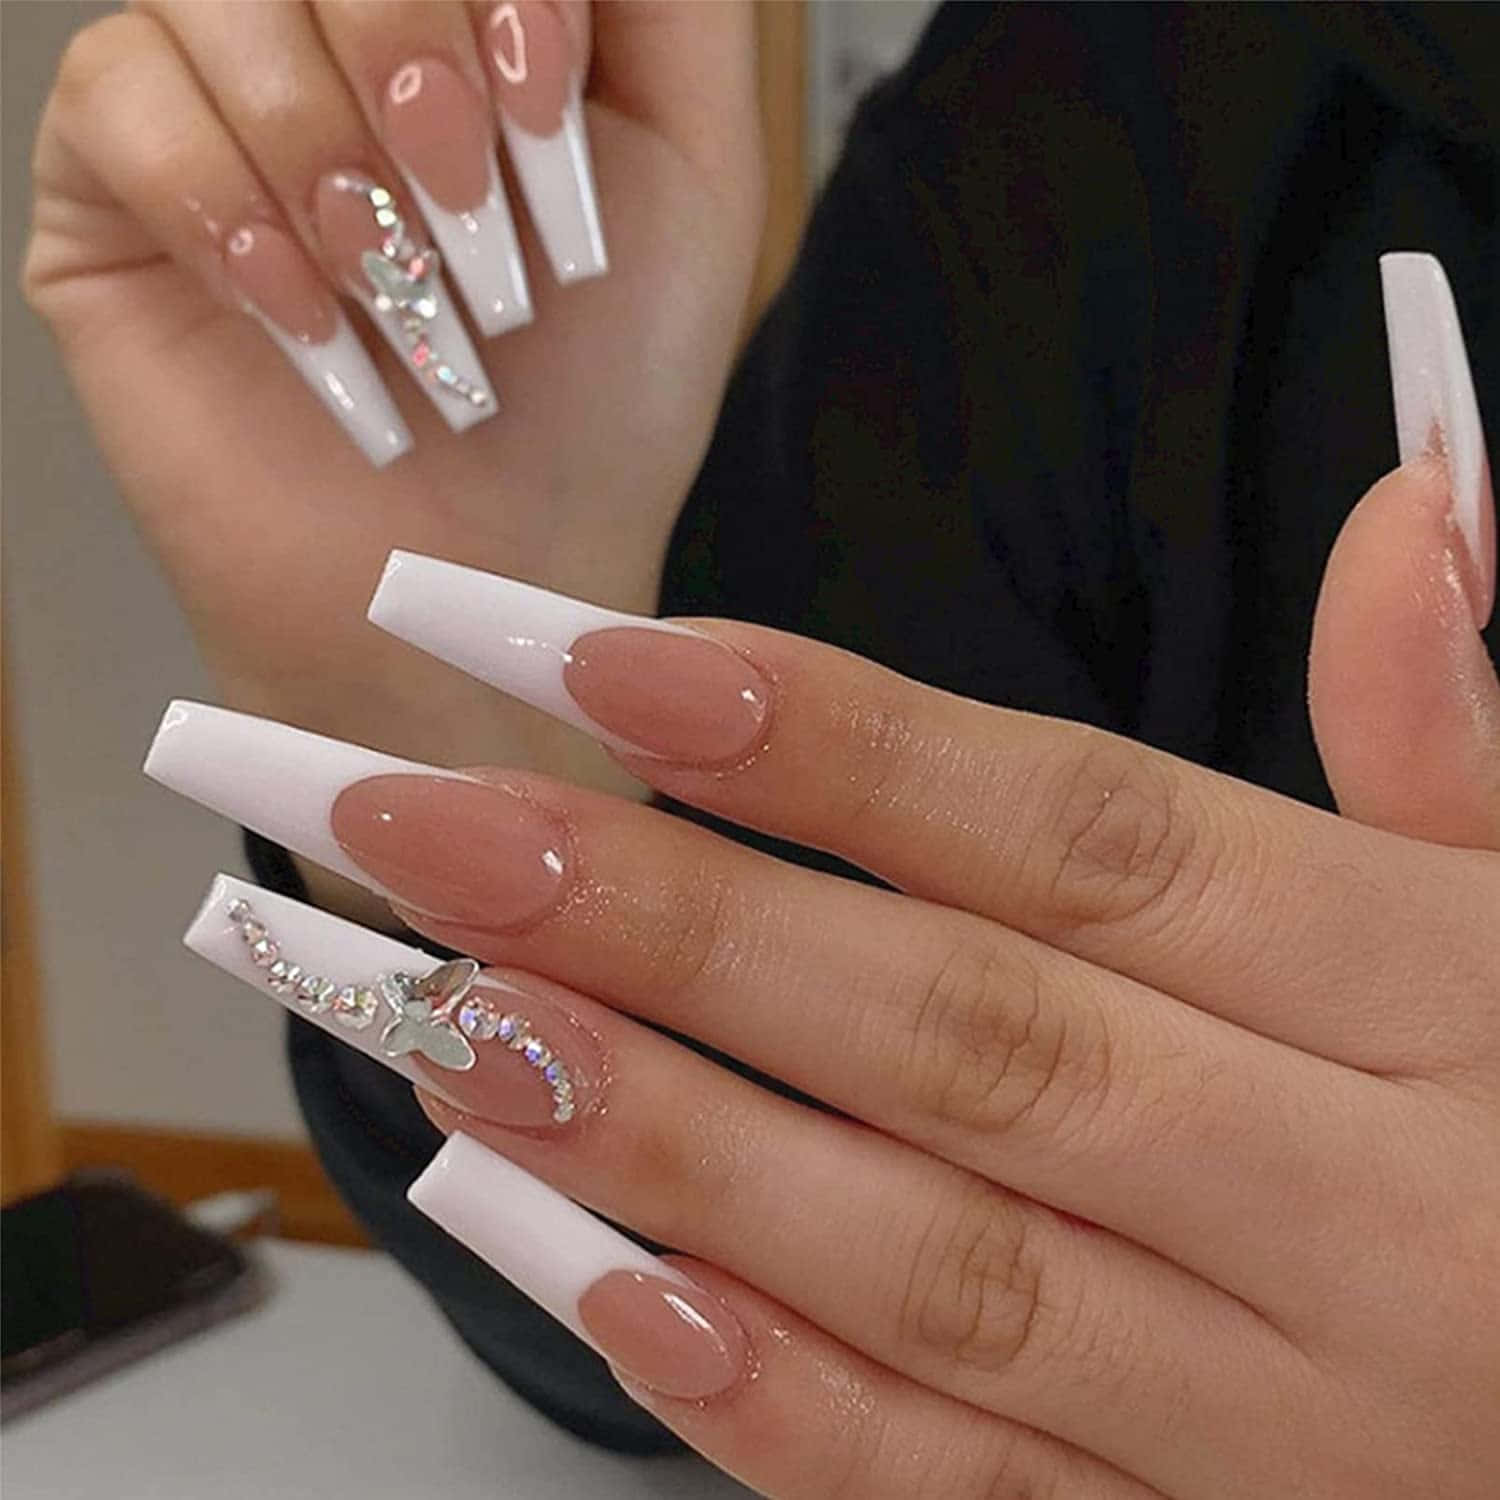 A Woman With White And White Nails Holding Up A White Nail